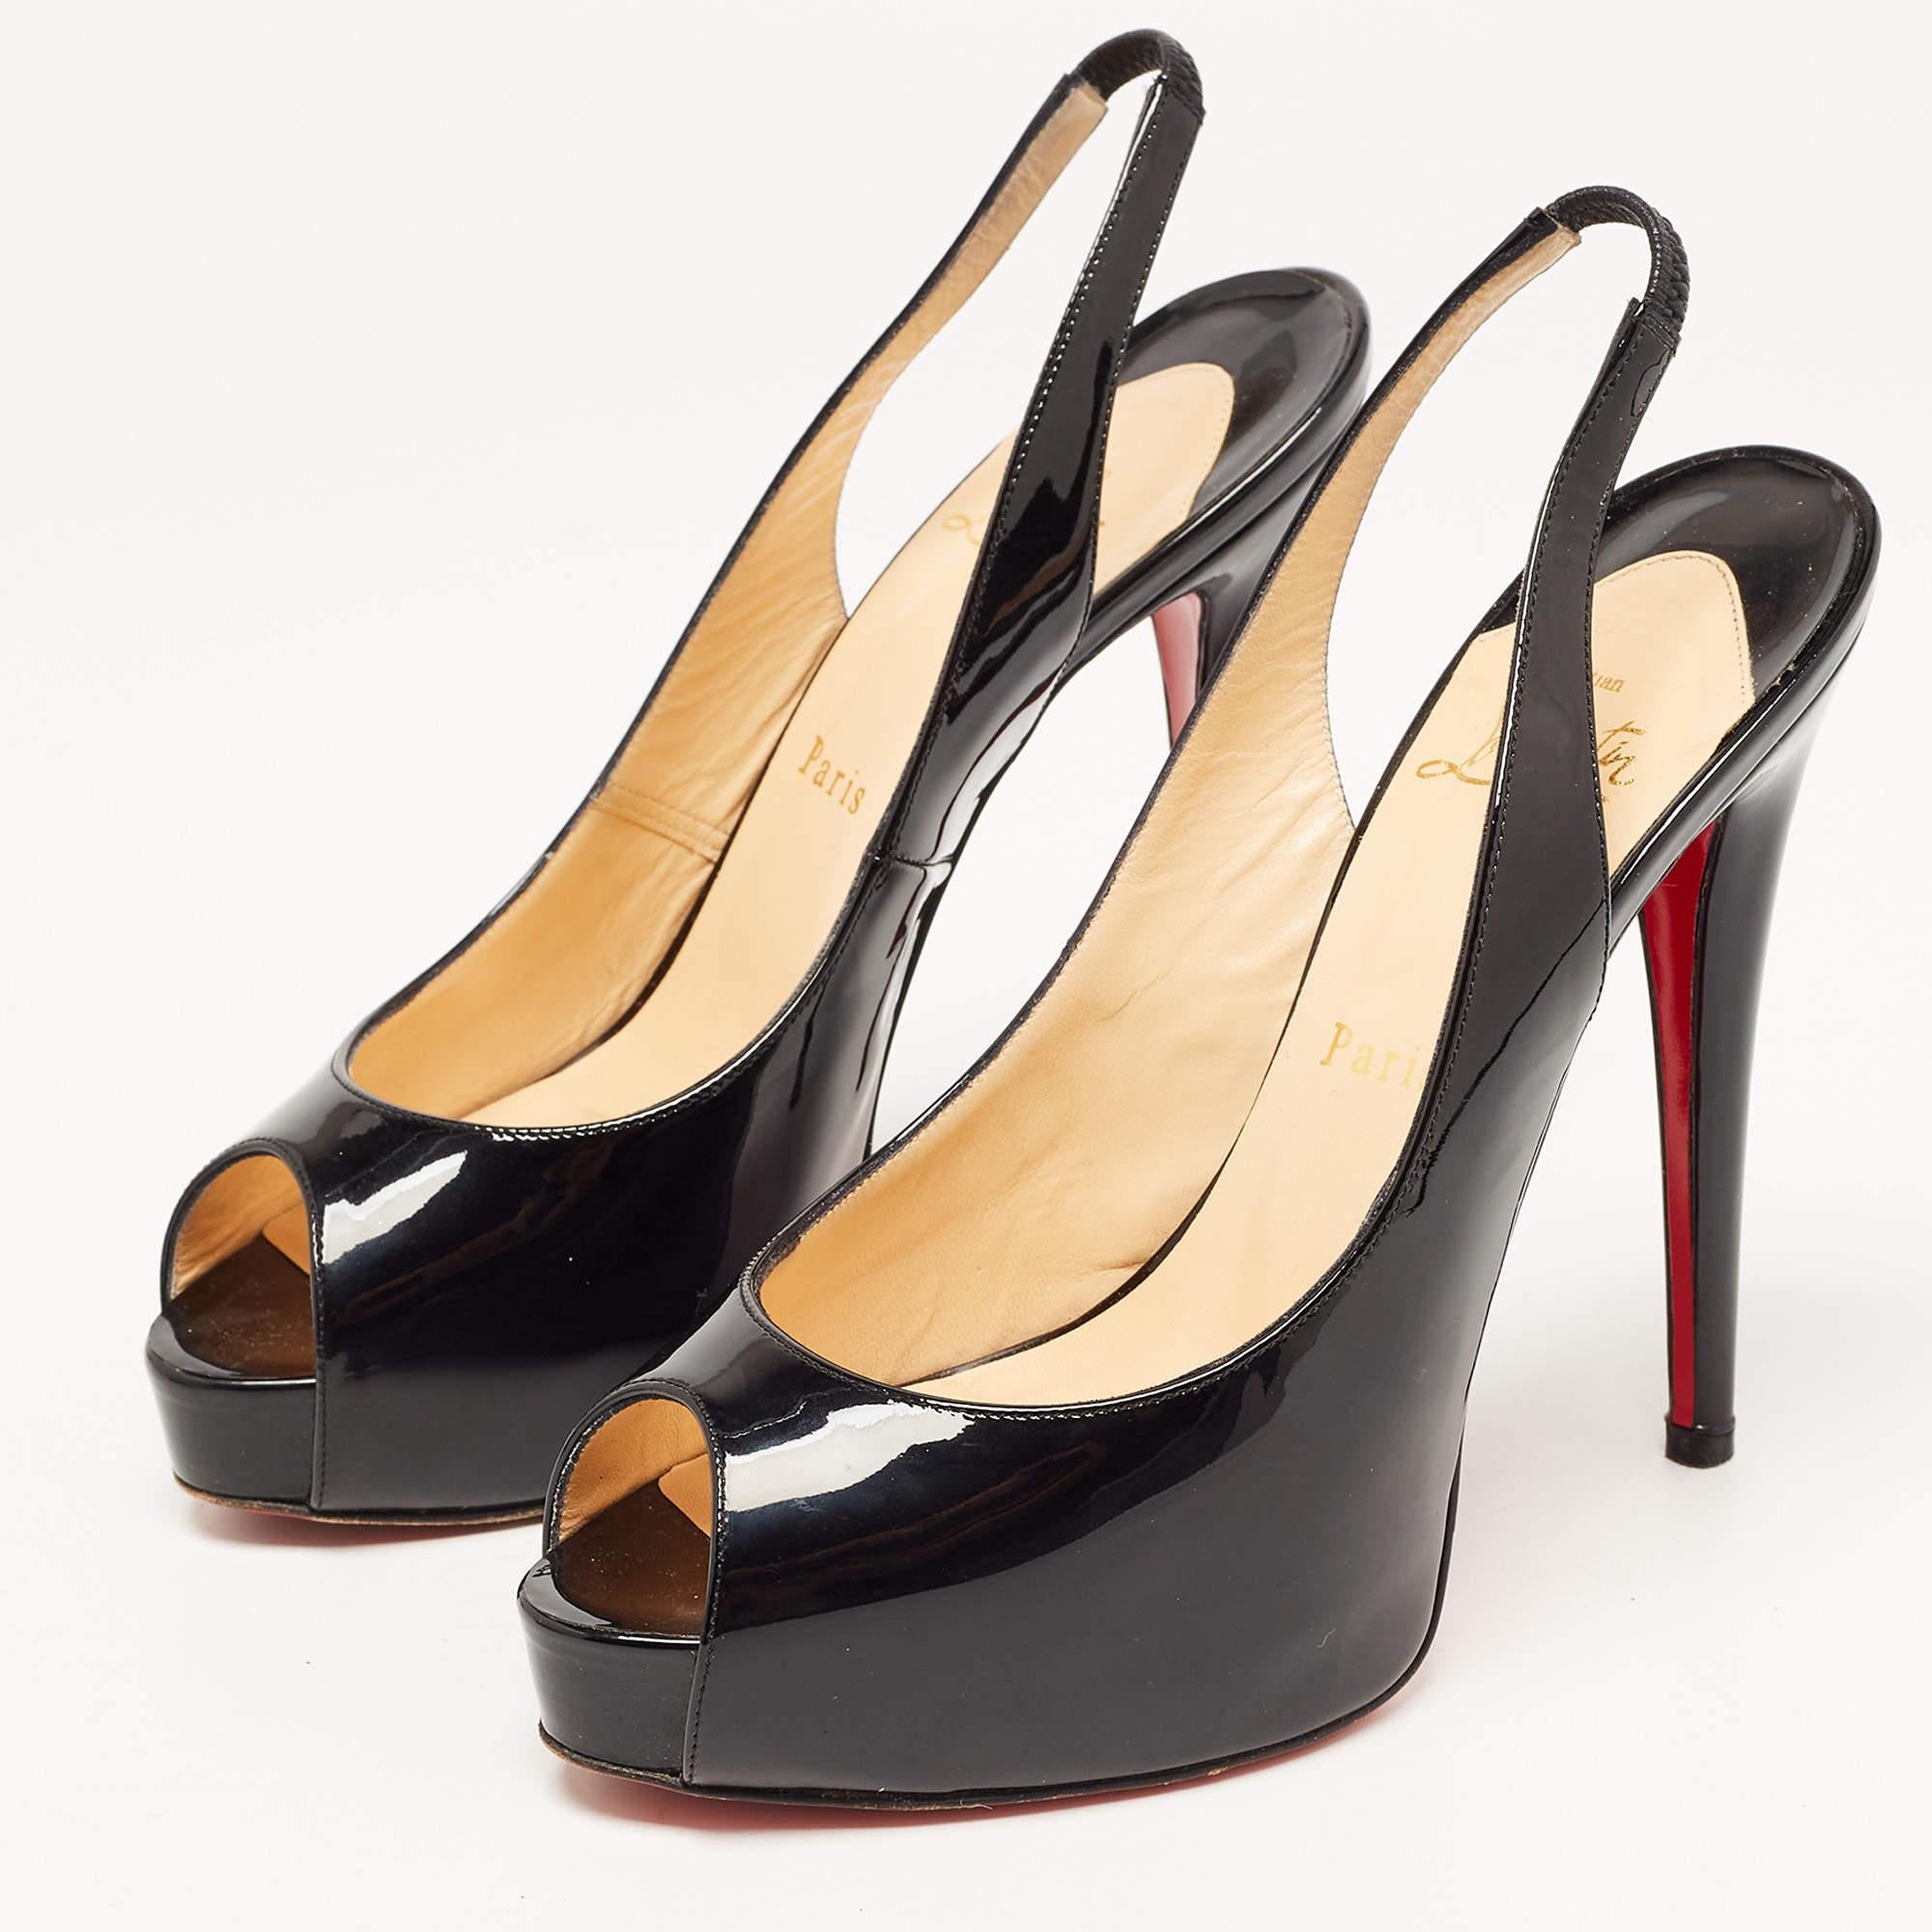 This pair of Christian Louboutin pumps is a timeless classic. Step out in style while flaunting these patent leather shoes, ideal for all occasions. They feature peep toes, platforms and 12.5cm heels. Signature red soles add the perfect finishing